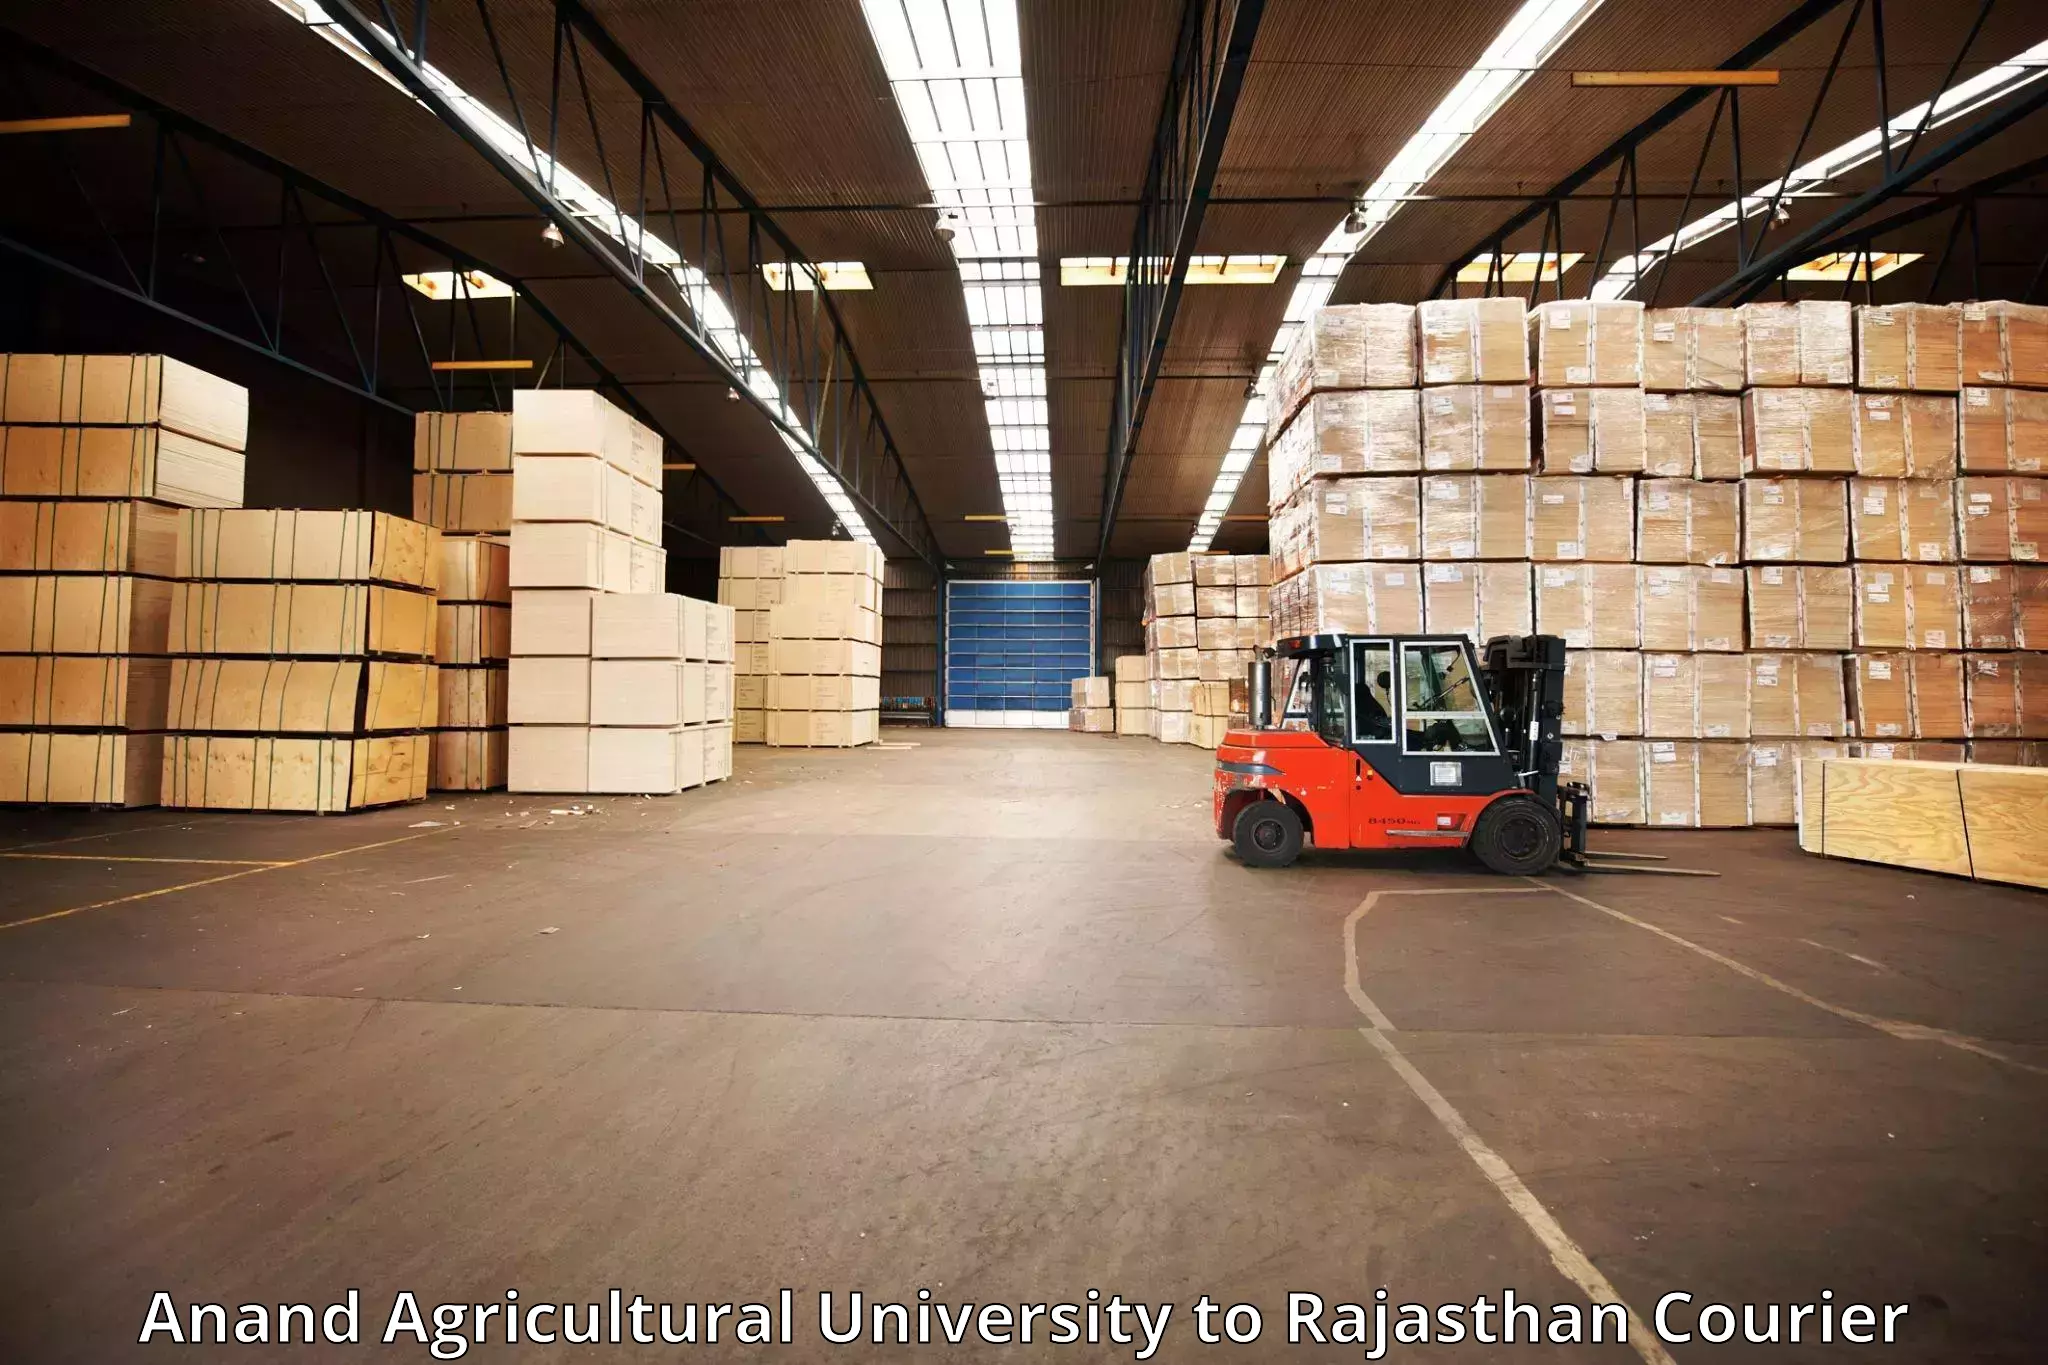 High-quality baggage shipment Anand Agricultural University to Nohar